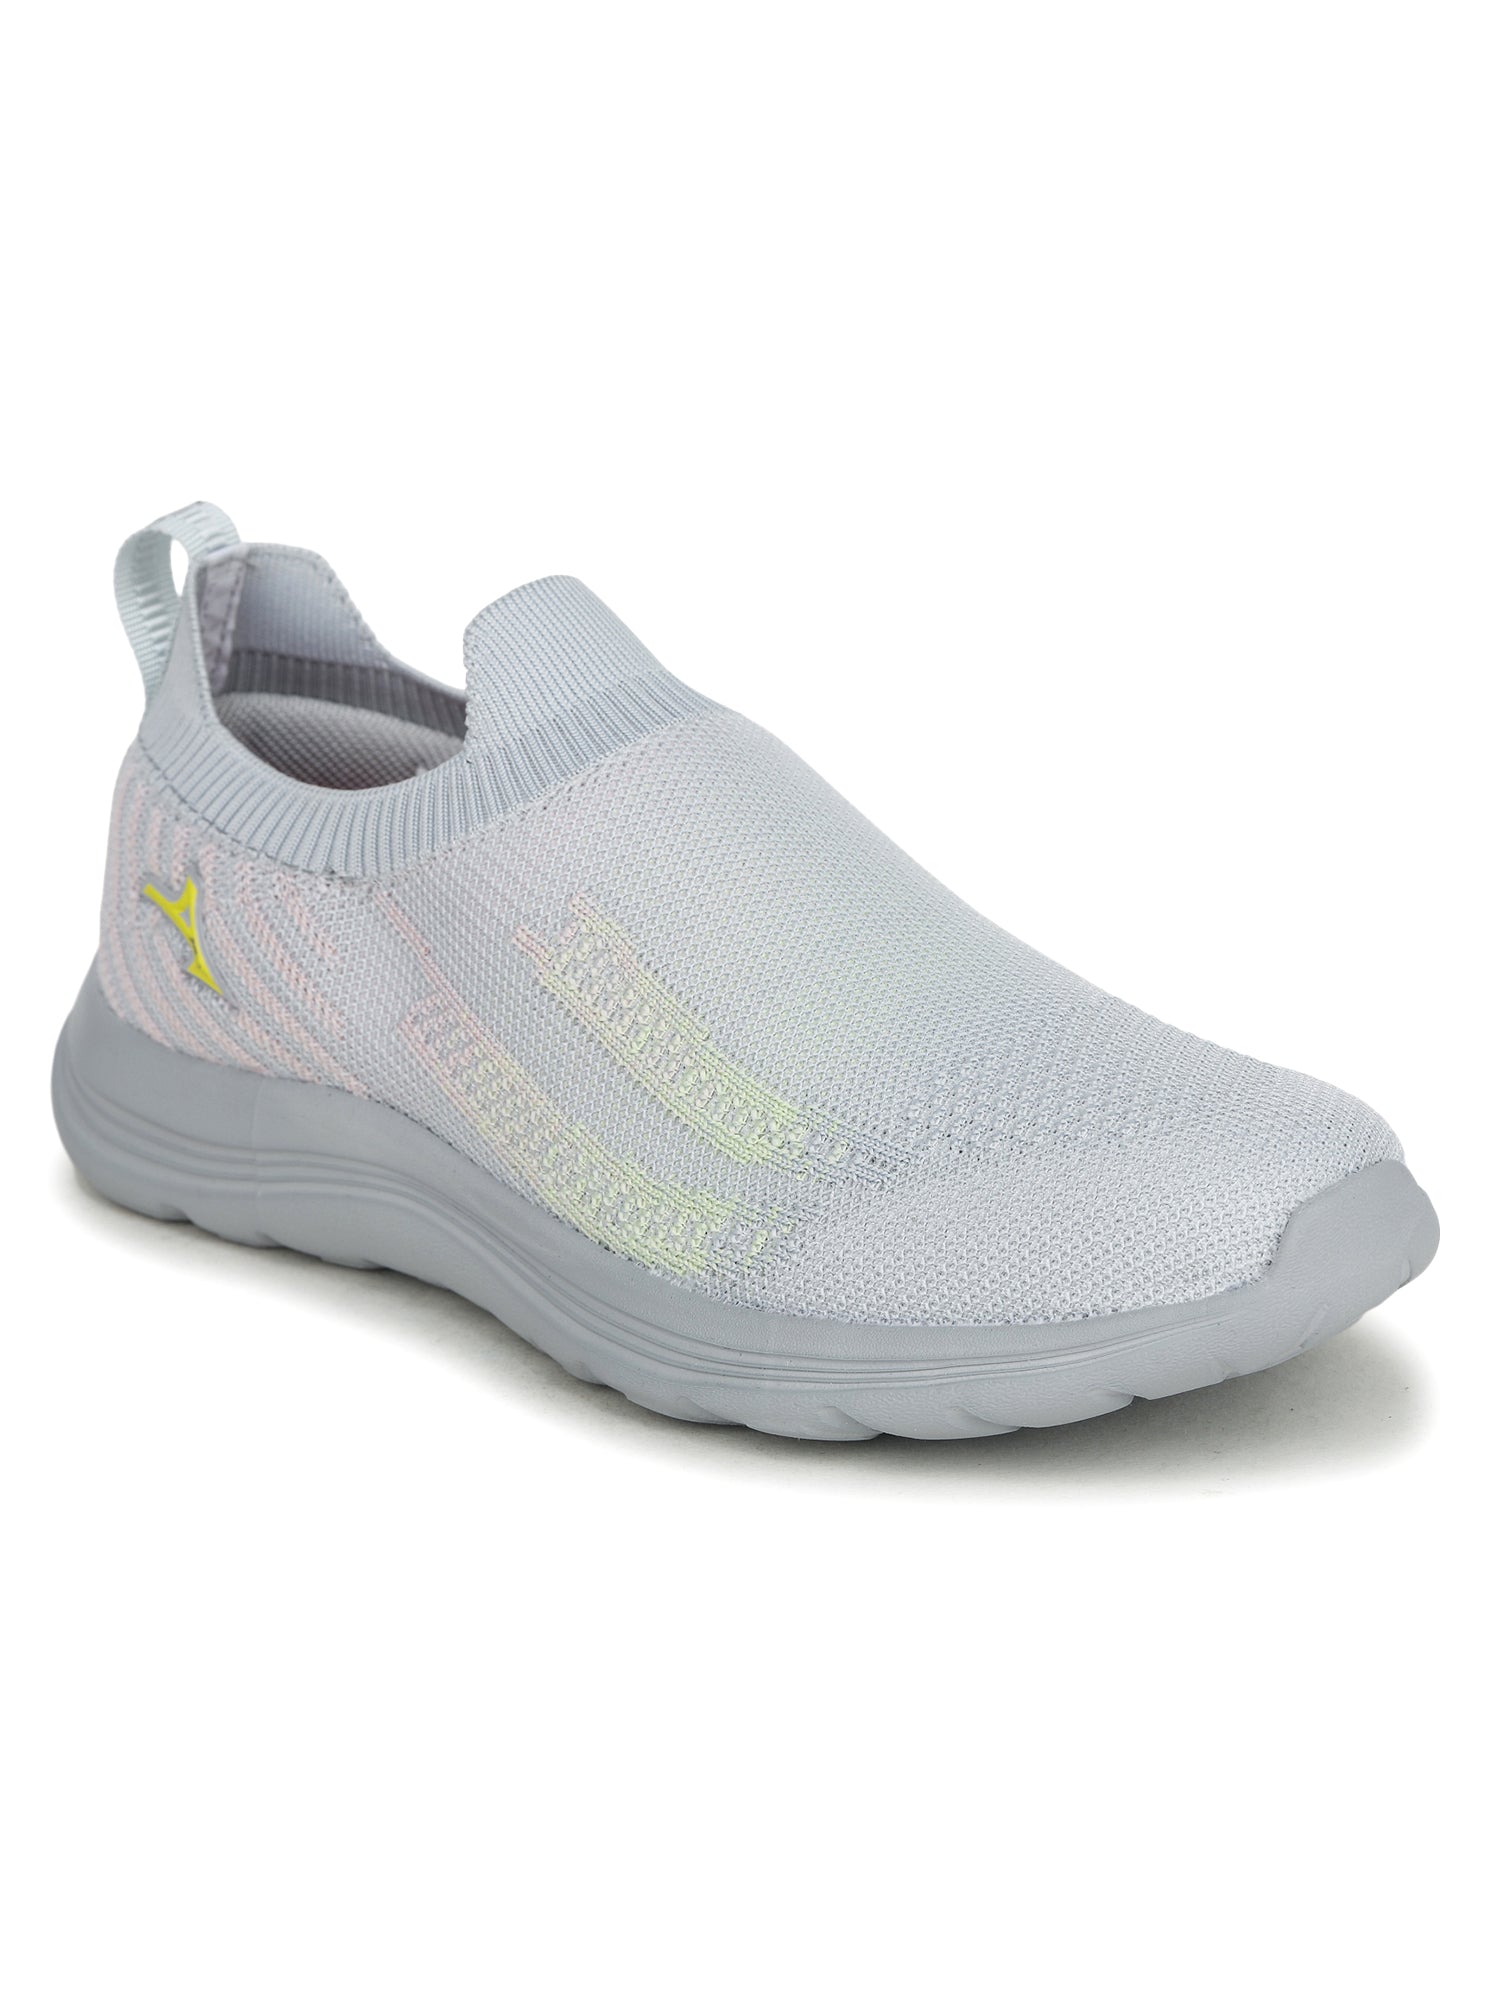 FROZA SPORTS SHOES FOR WOMEN